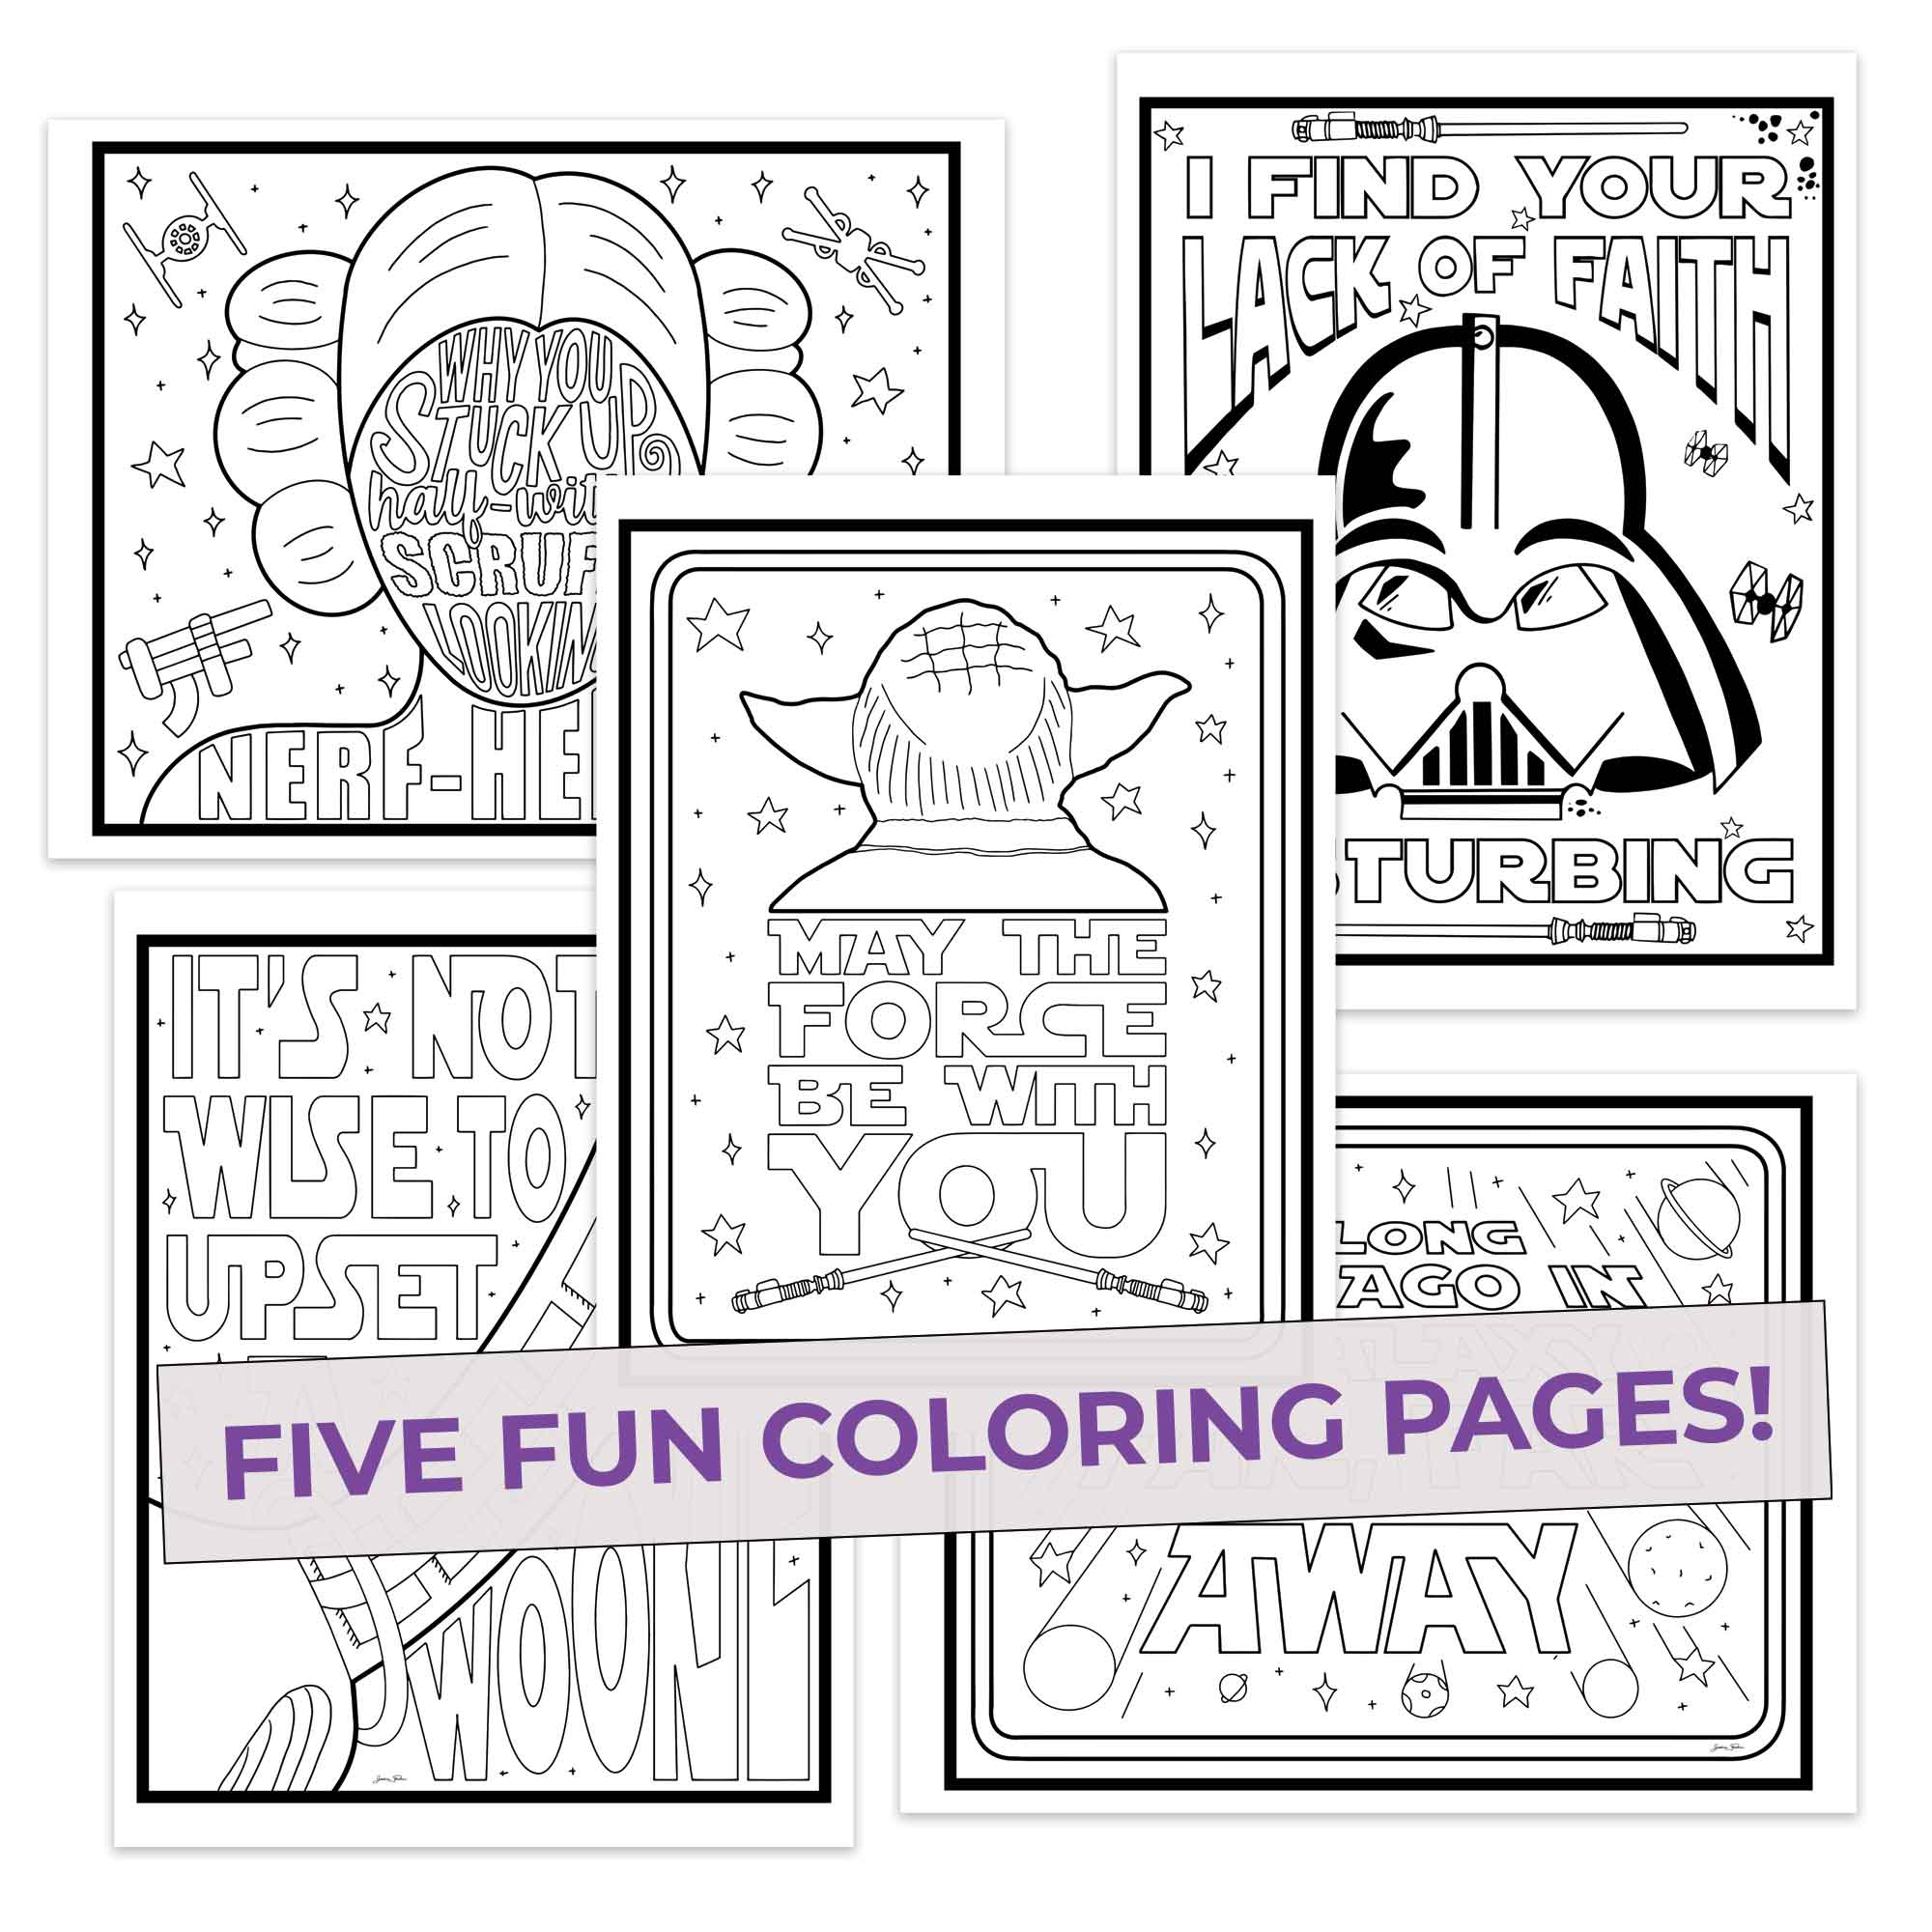 Star wars inspired coloring pages pack â pop colors